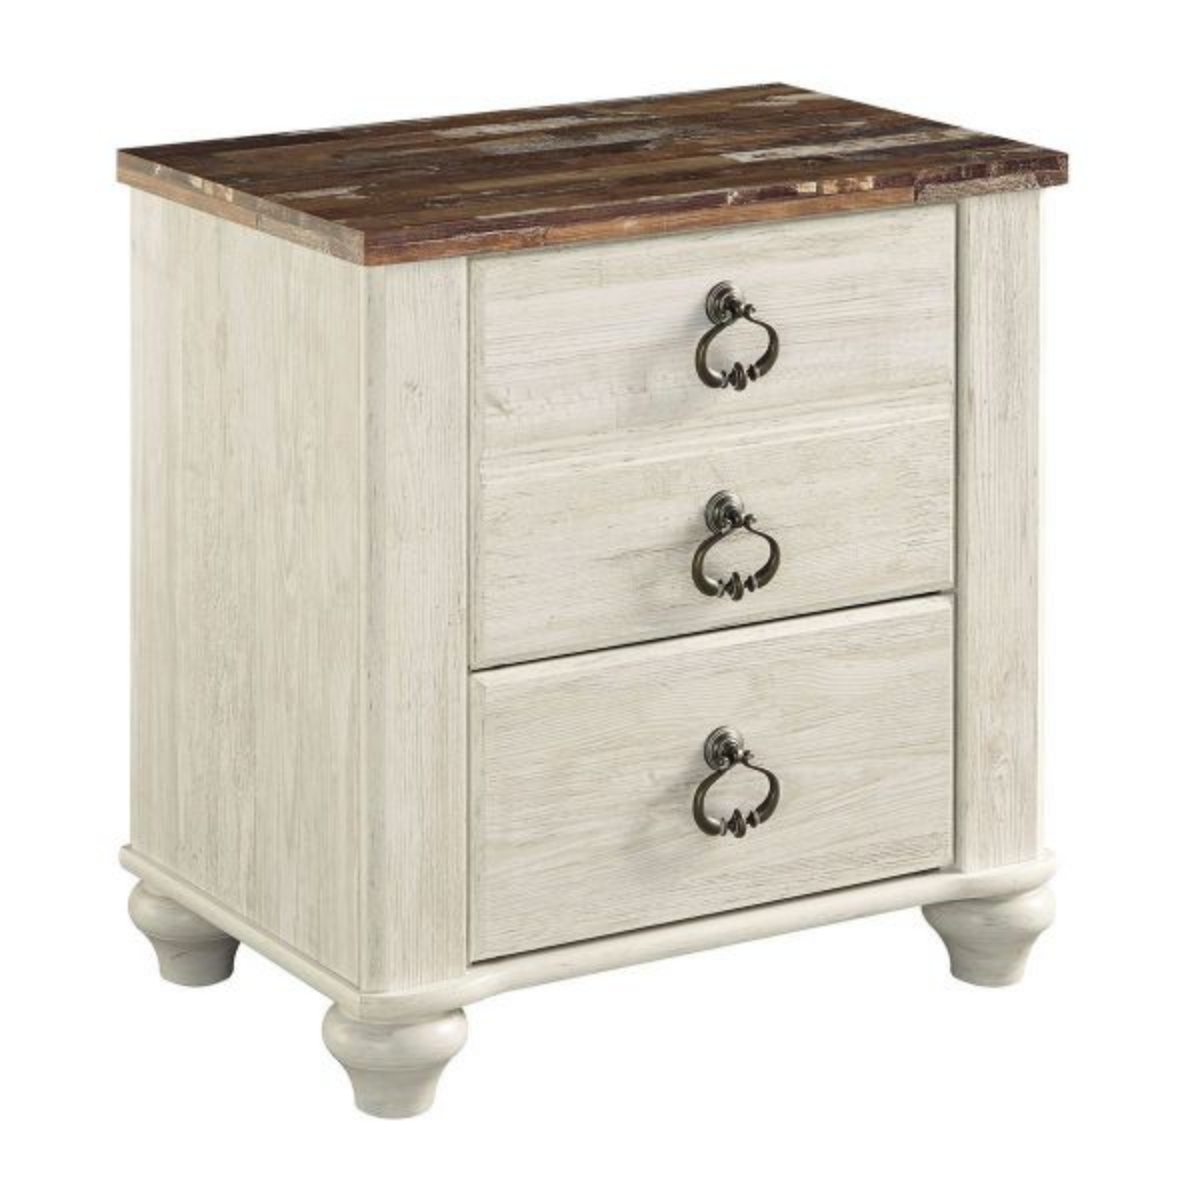 Picture of Wildflower 2 Drawer Nightstand